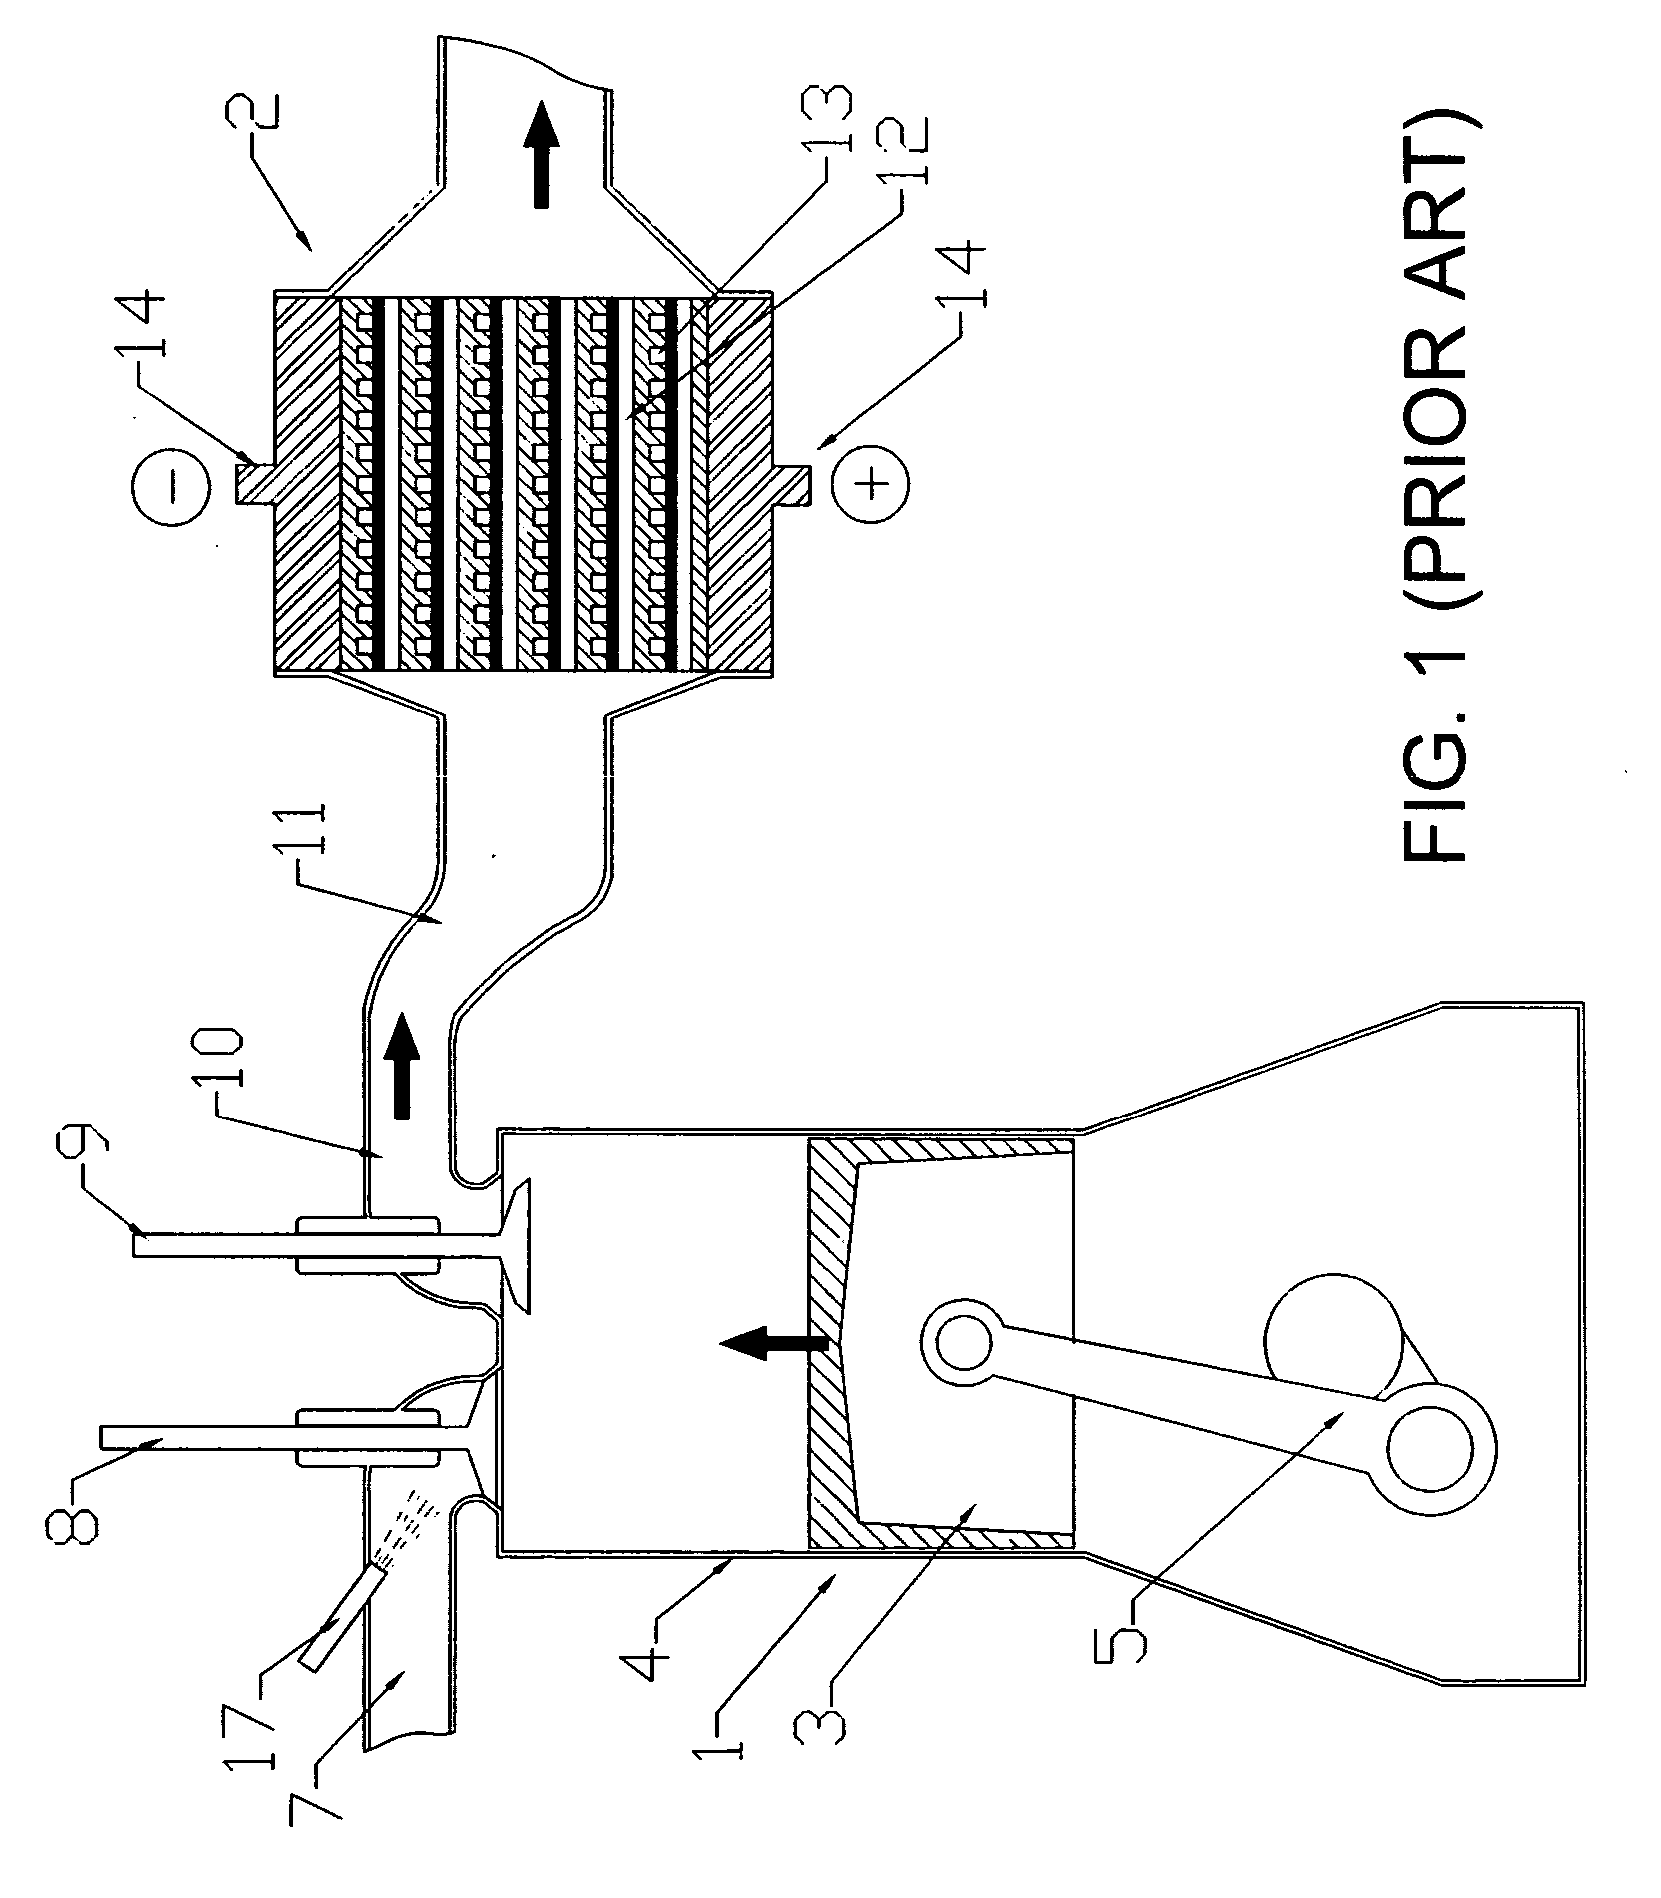 Hybrid fuel cell system with internal combustion reforming